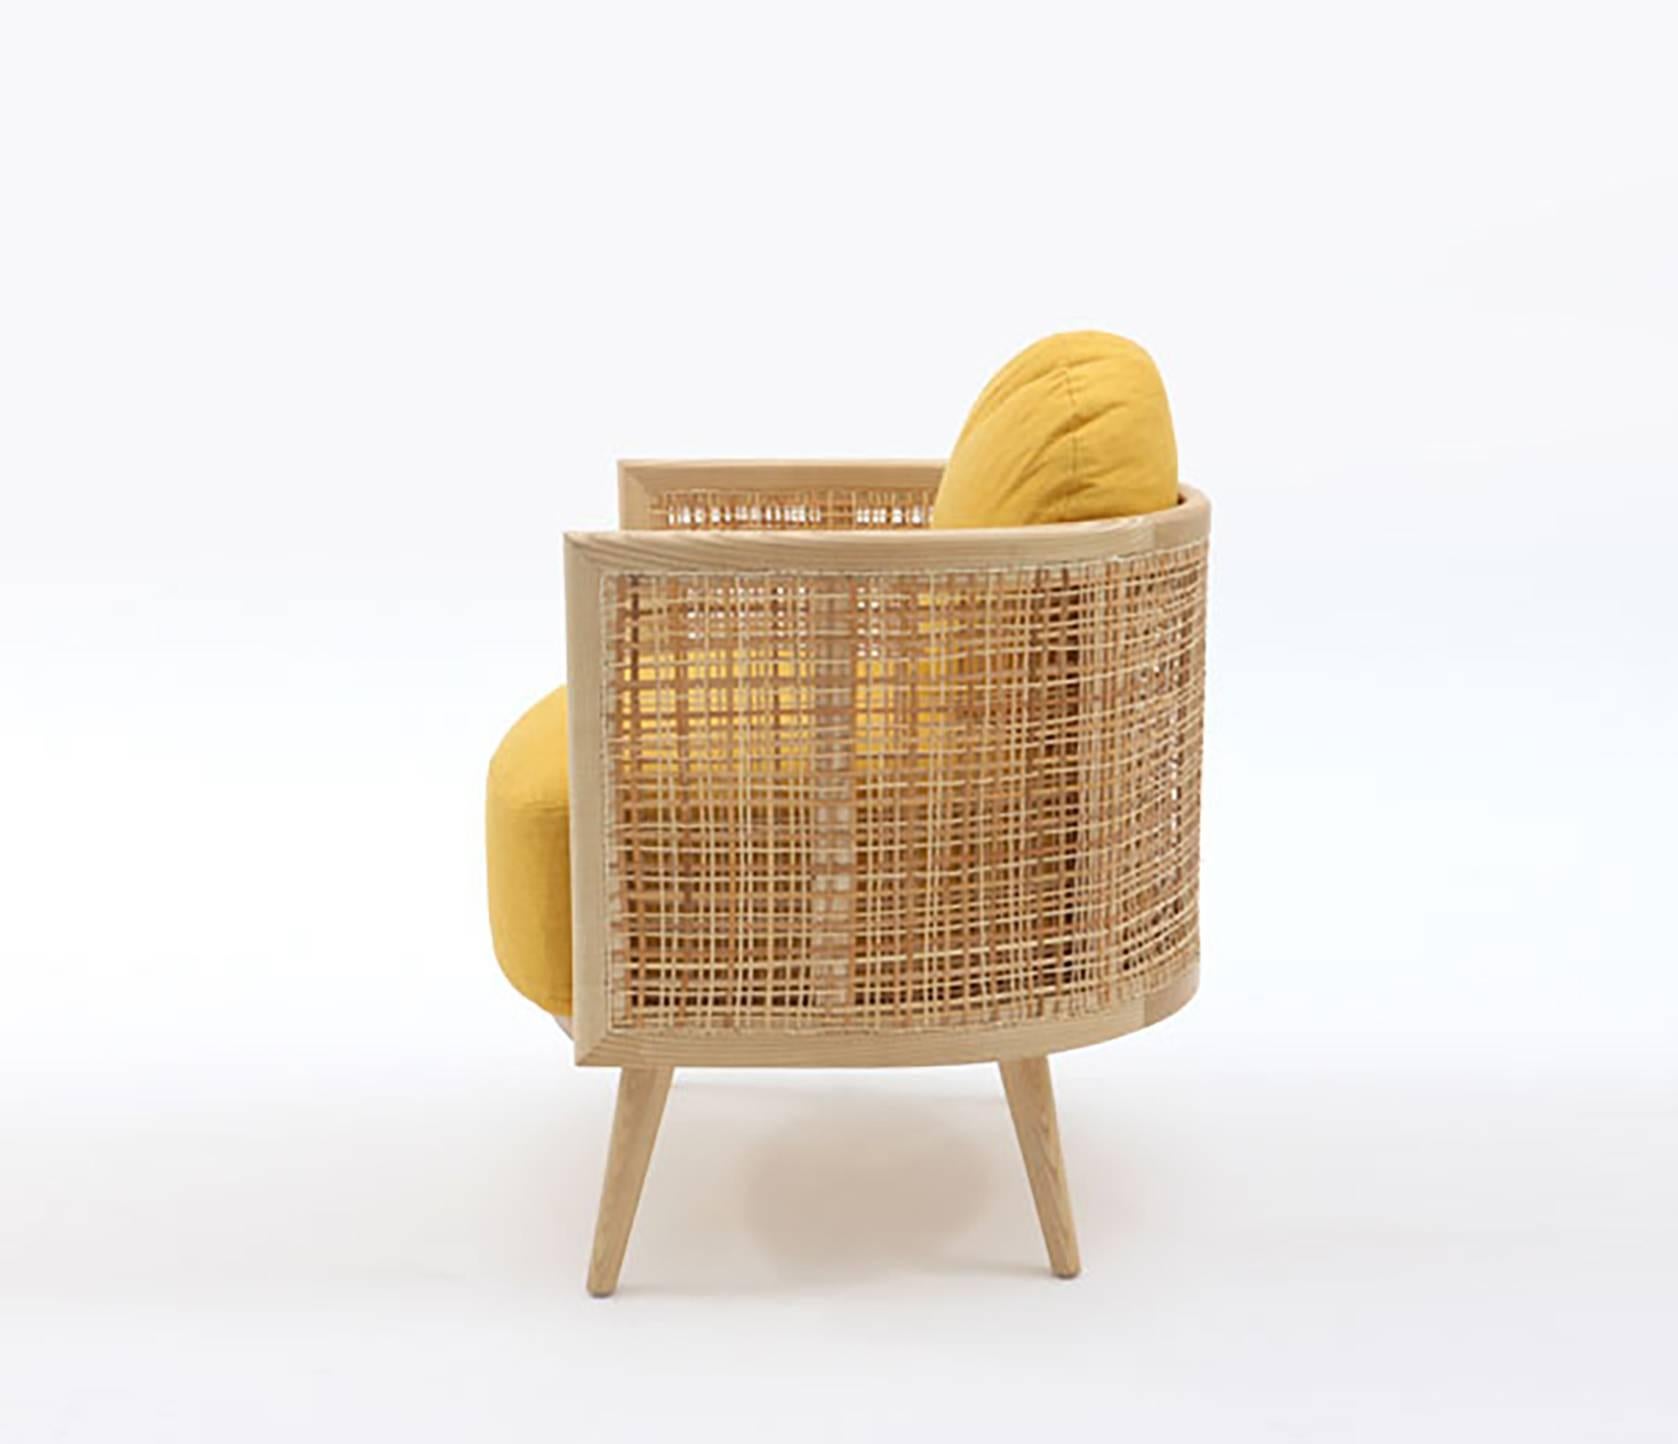 Nada Debs Summerland armchair, yellow fabric, natural wood. Mid-century design in ashwood is crafted into the piece, featuring woven straw. 

Condition: Brand New
Production Lead Time: Available now for pick up or shipping.
Color: Light brown /